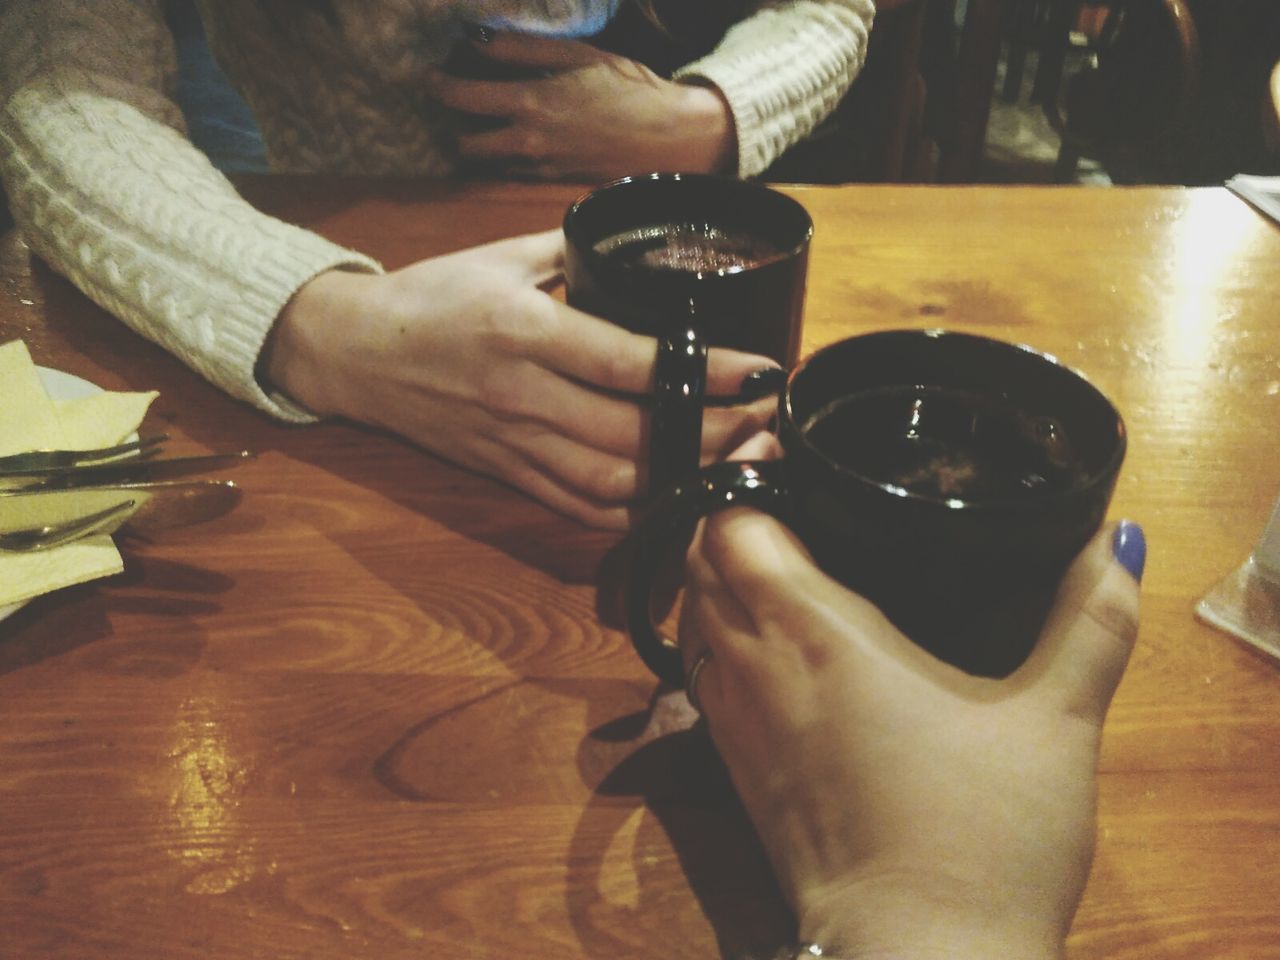 CLOSE-UP OF HUMAN HAND HOLDING DRINK